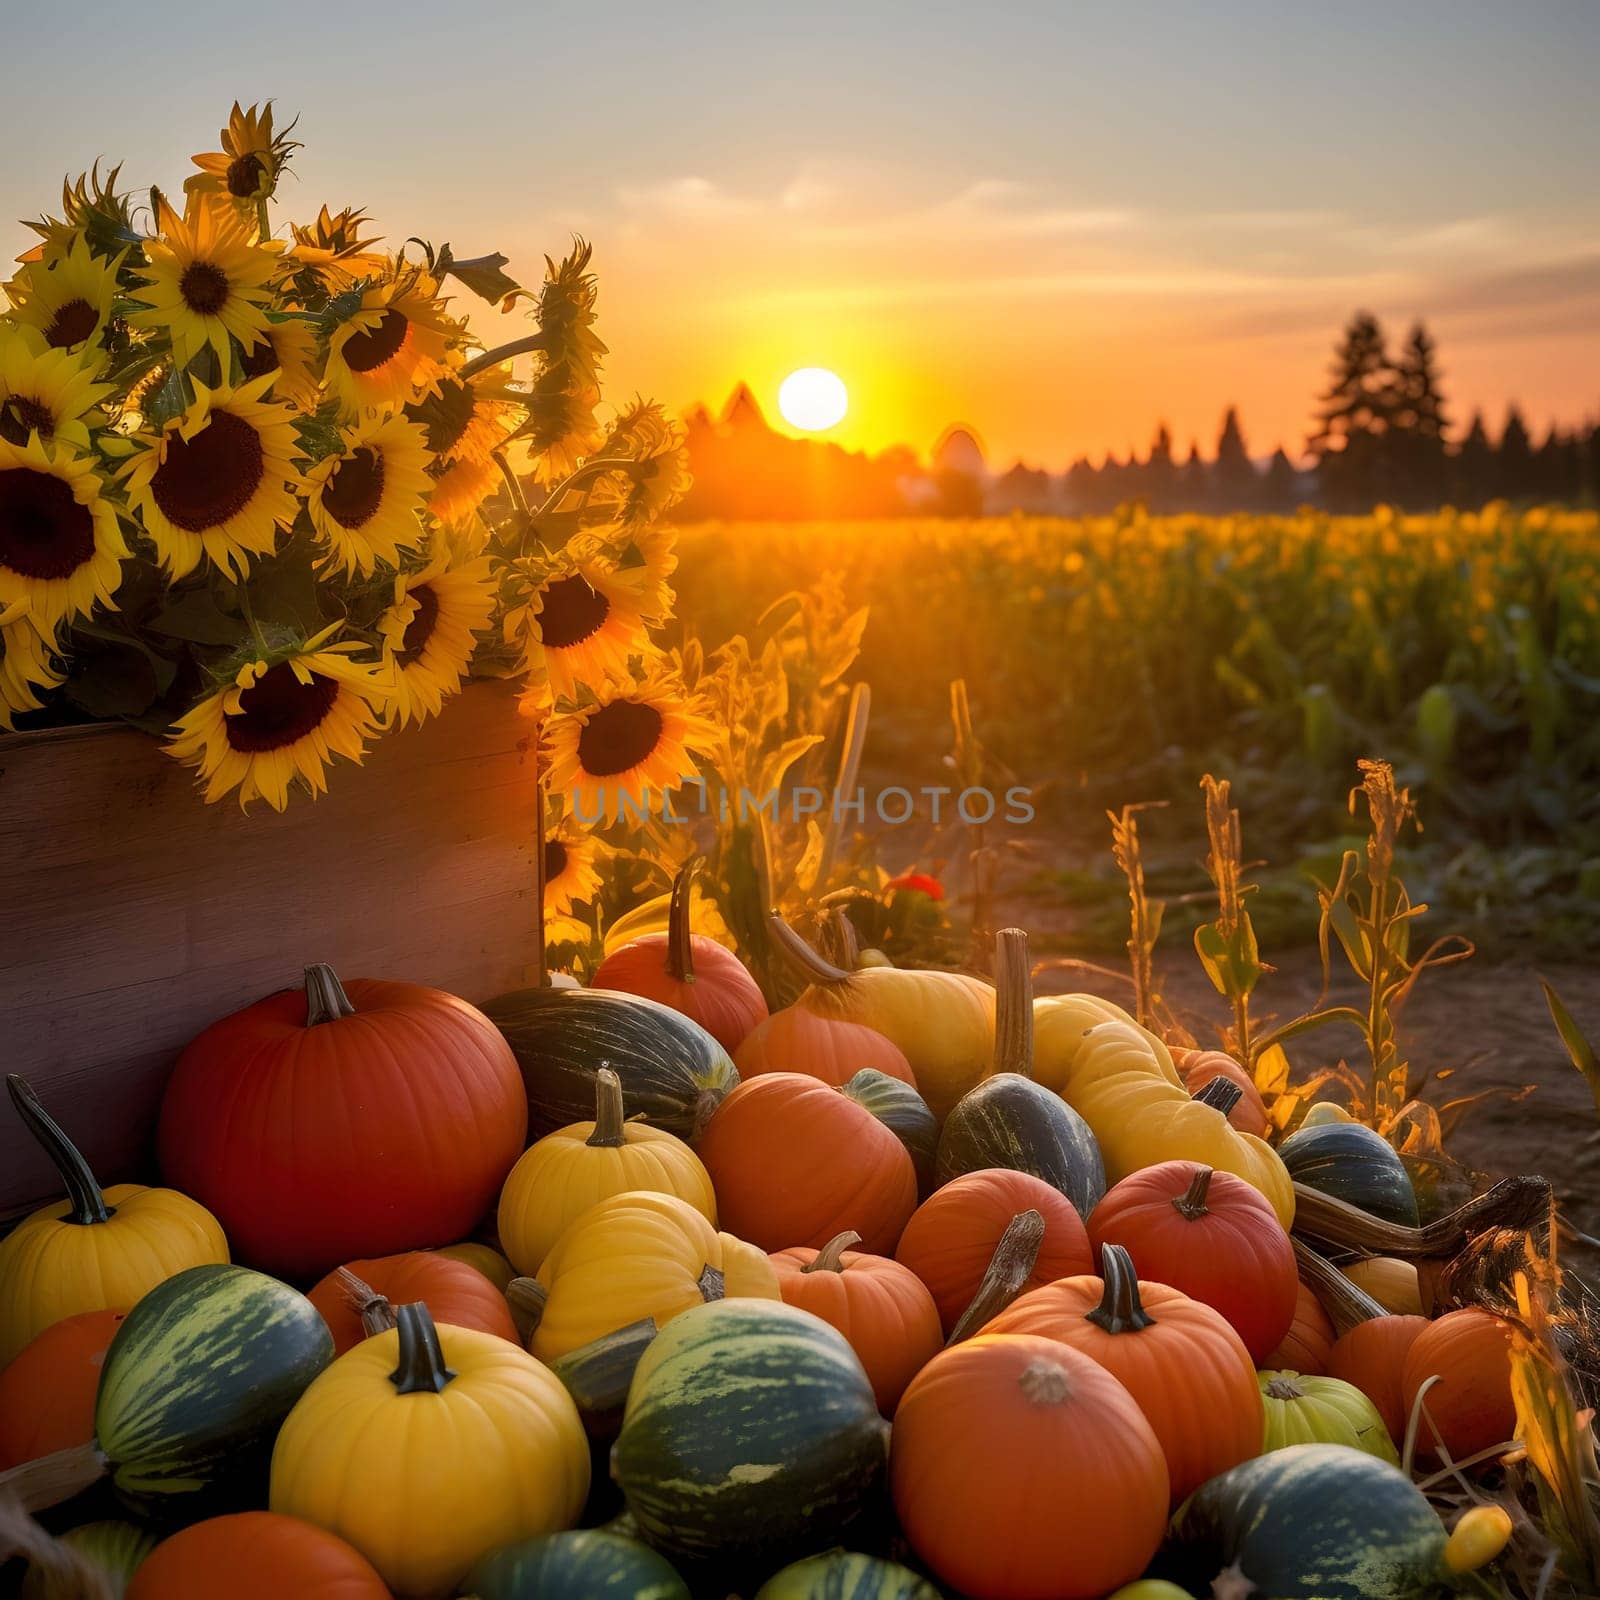 Sunset over the field in the foreground sunflowers and harvested colorful pumpkins. Pumpkin as a dish of thanksgiving for the harvest. by ThemesS